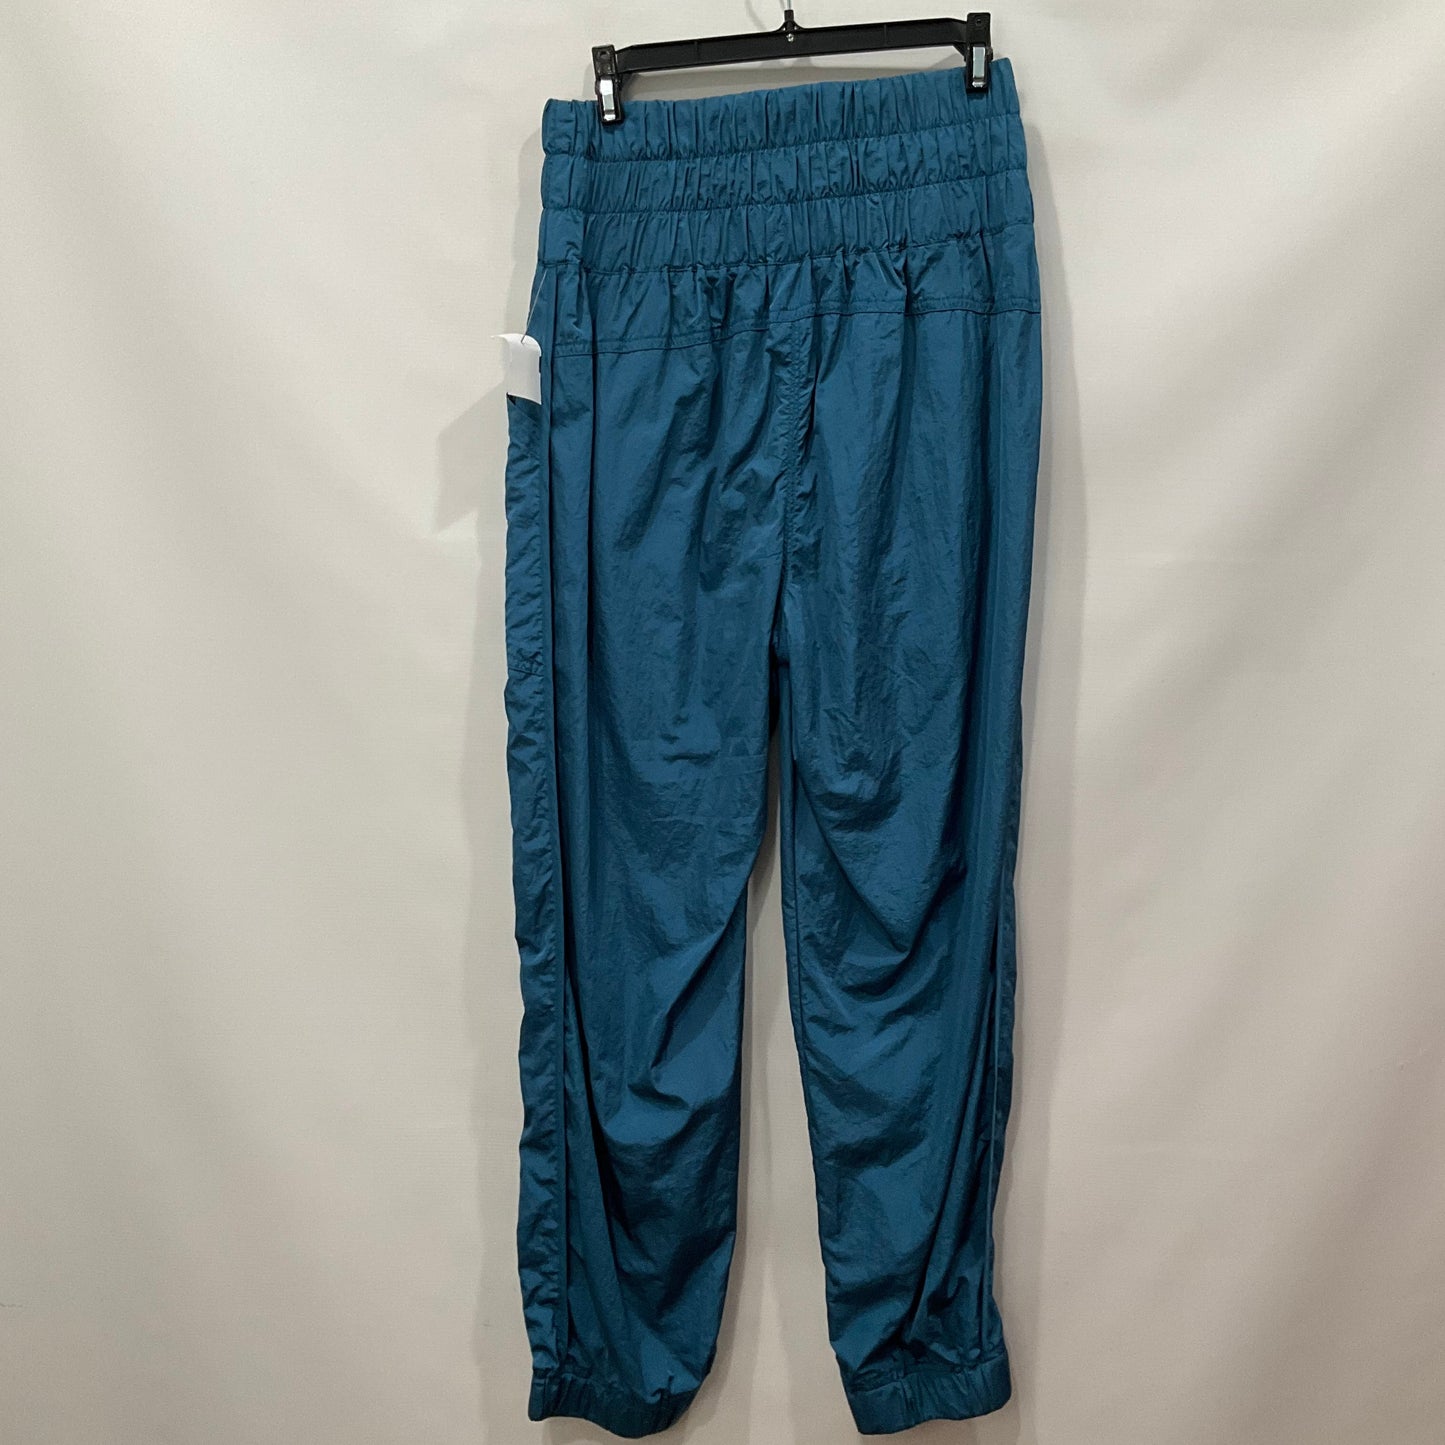 Teal Athletic Pants Free People, Size M